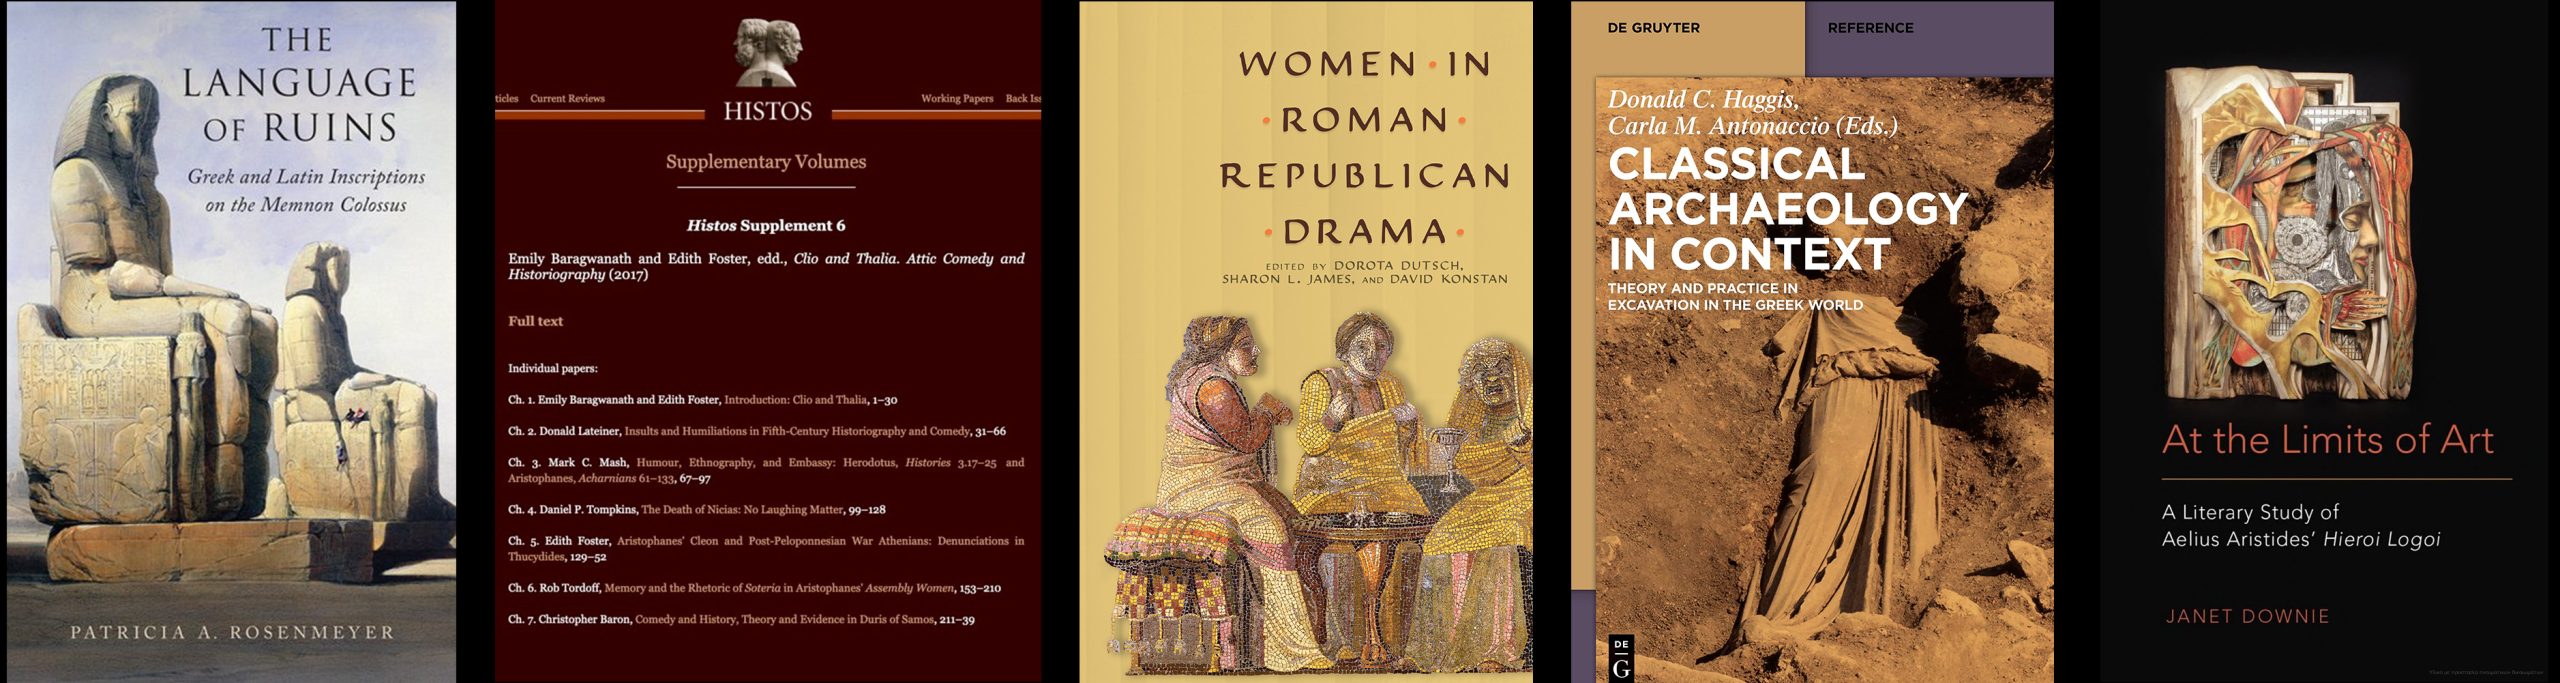 1. The Language of Ruins: Greek and Latin Inscriptions on the Memnon Colossus by Patricia A. Rosenmeyer. 2. Histos Supplement 6 by Emily Baragwanath and Edith Foster. 3. Women in Roman Republican Drama edited by Dorota Dutsch, Sharon L. James, and David Konstan. 4. Classical Archaeology in Context: Theory and Practice in Excavation in the Greek World edited by Donald C. Haggis and Carla M. Antonaccio. 5. At the Limits of Art: A Literary Study of Aelius Aristides' Hieroi Logoi by Janet Downie.